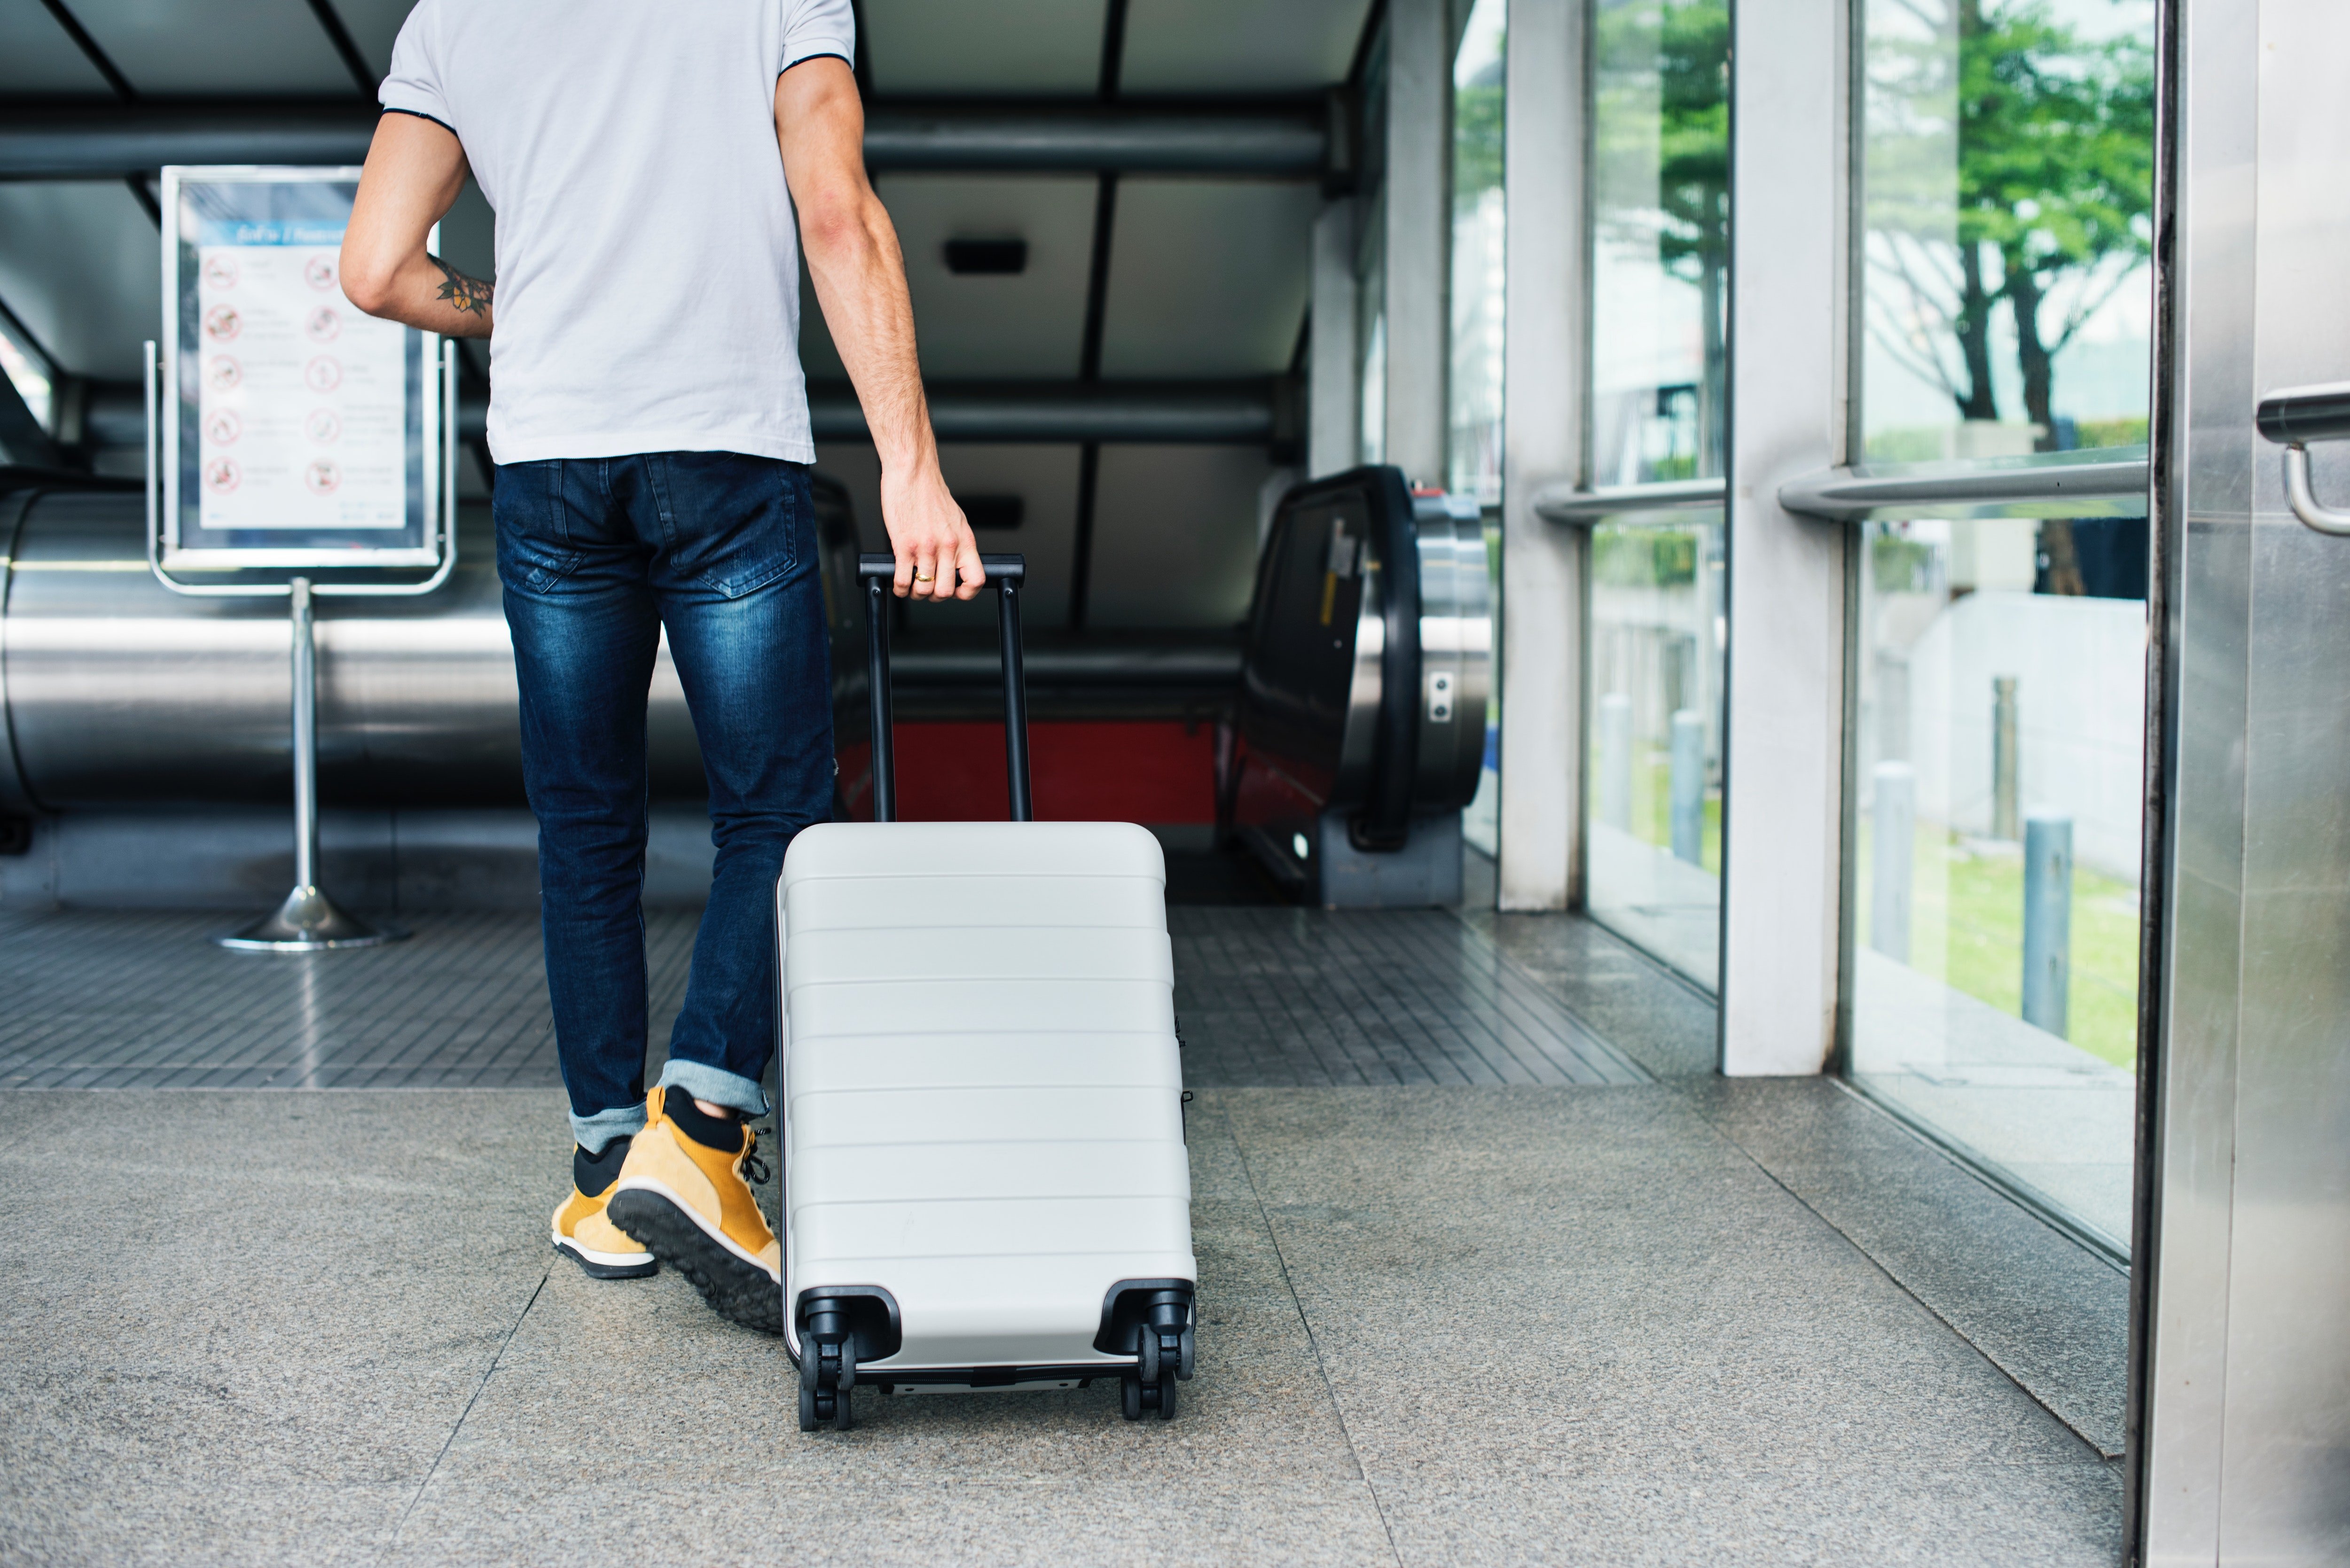 A man carrying a suitcase. | Source: Pexels